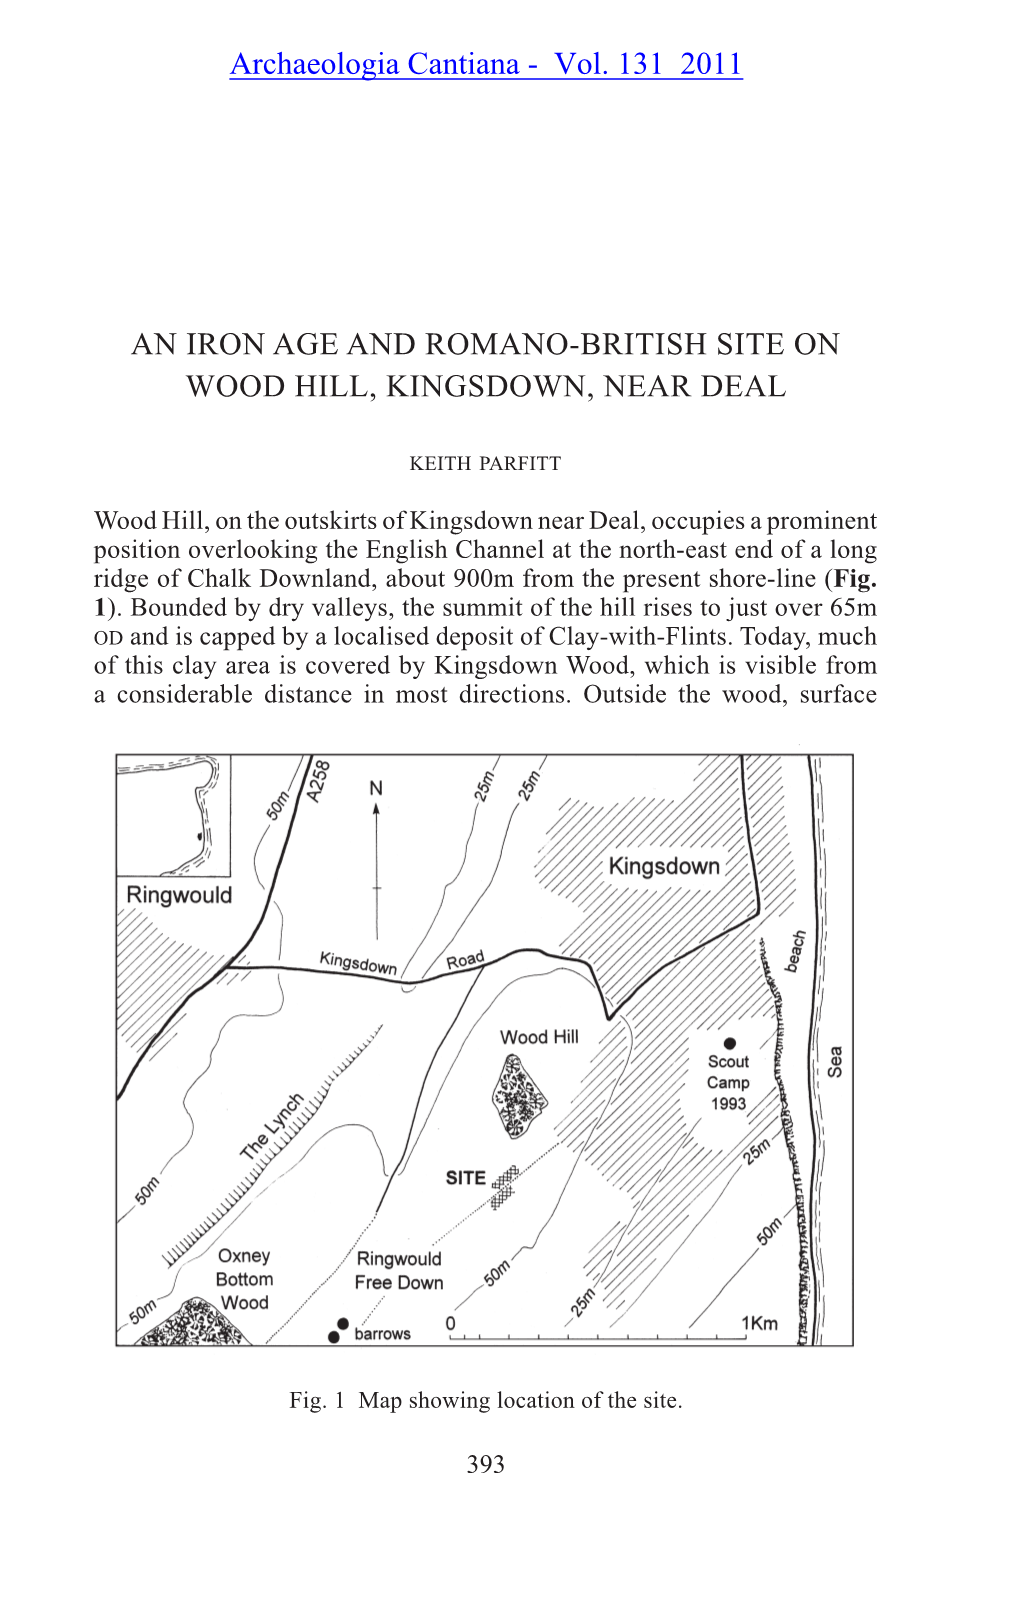 An Iron Age and Romano-British Site on Wood Hill, Kingsdown, Near Deal